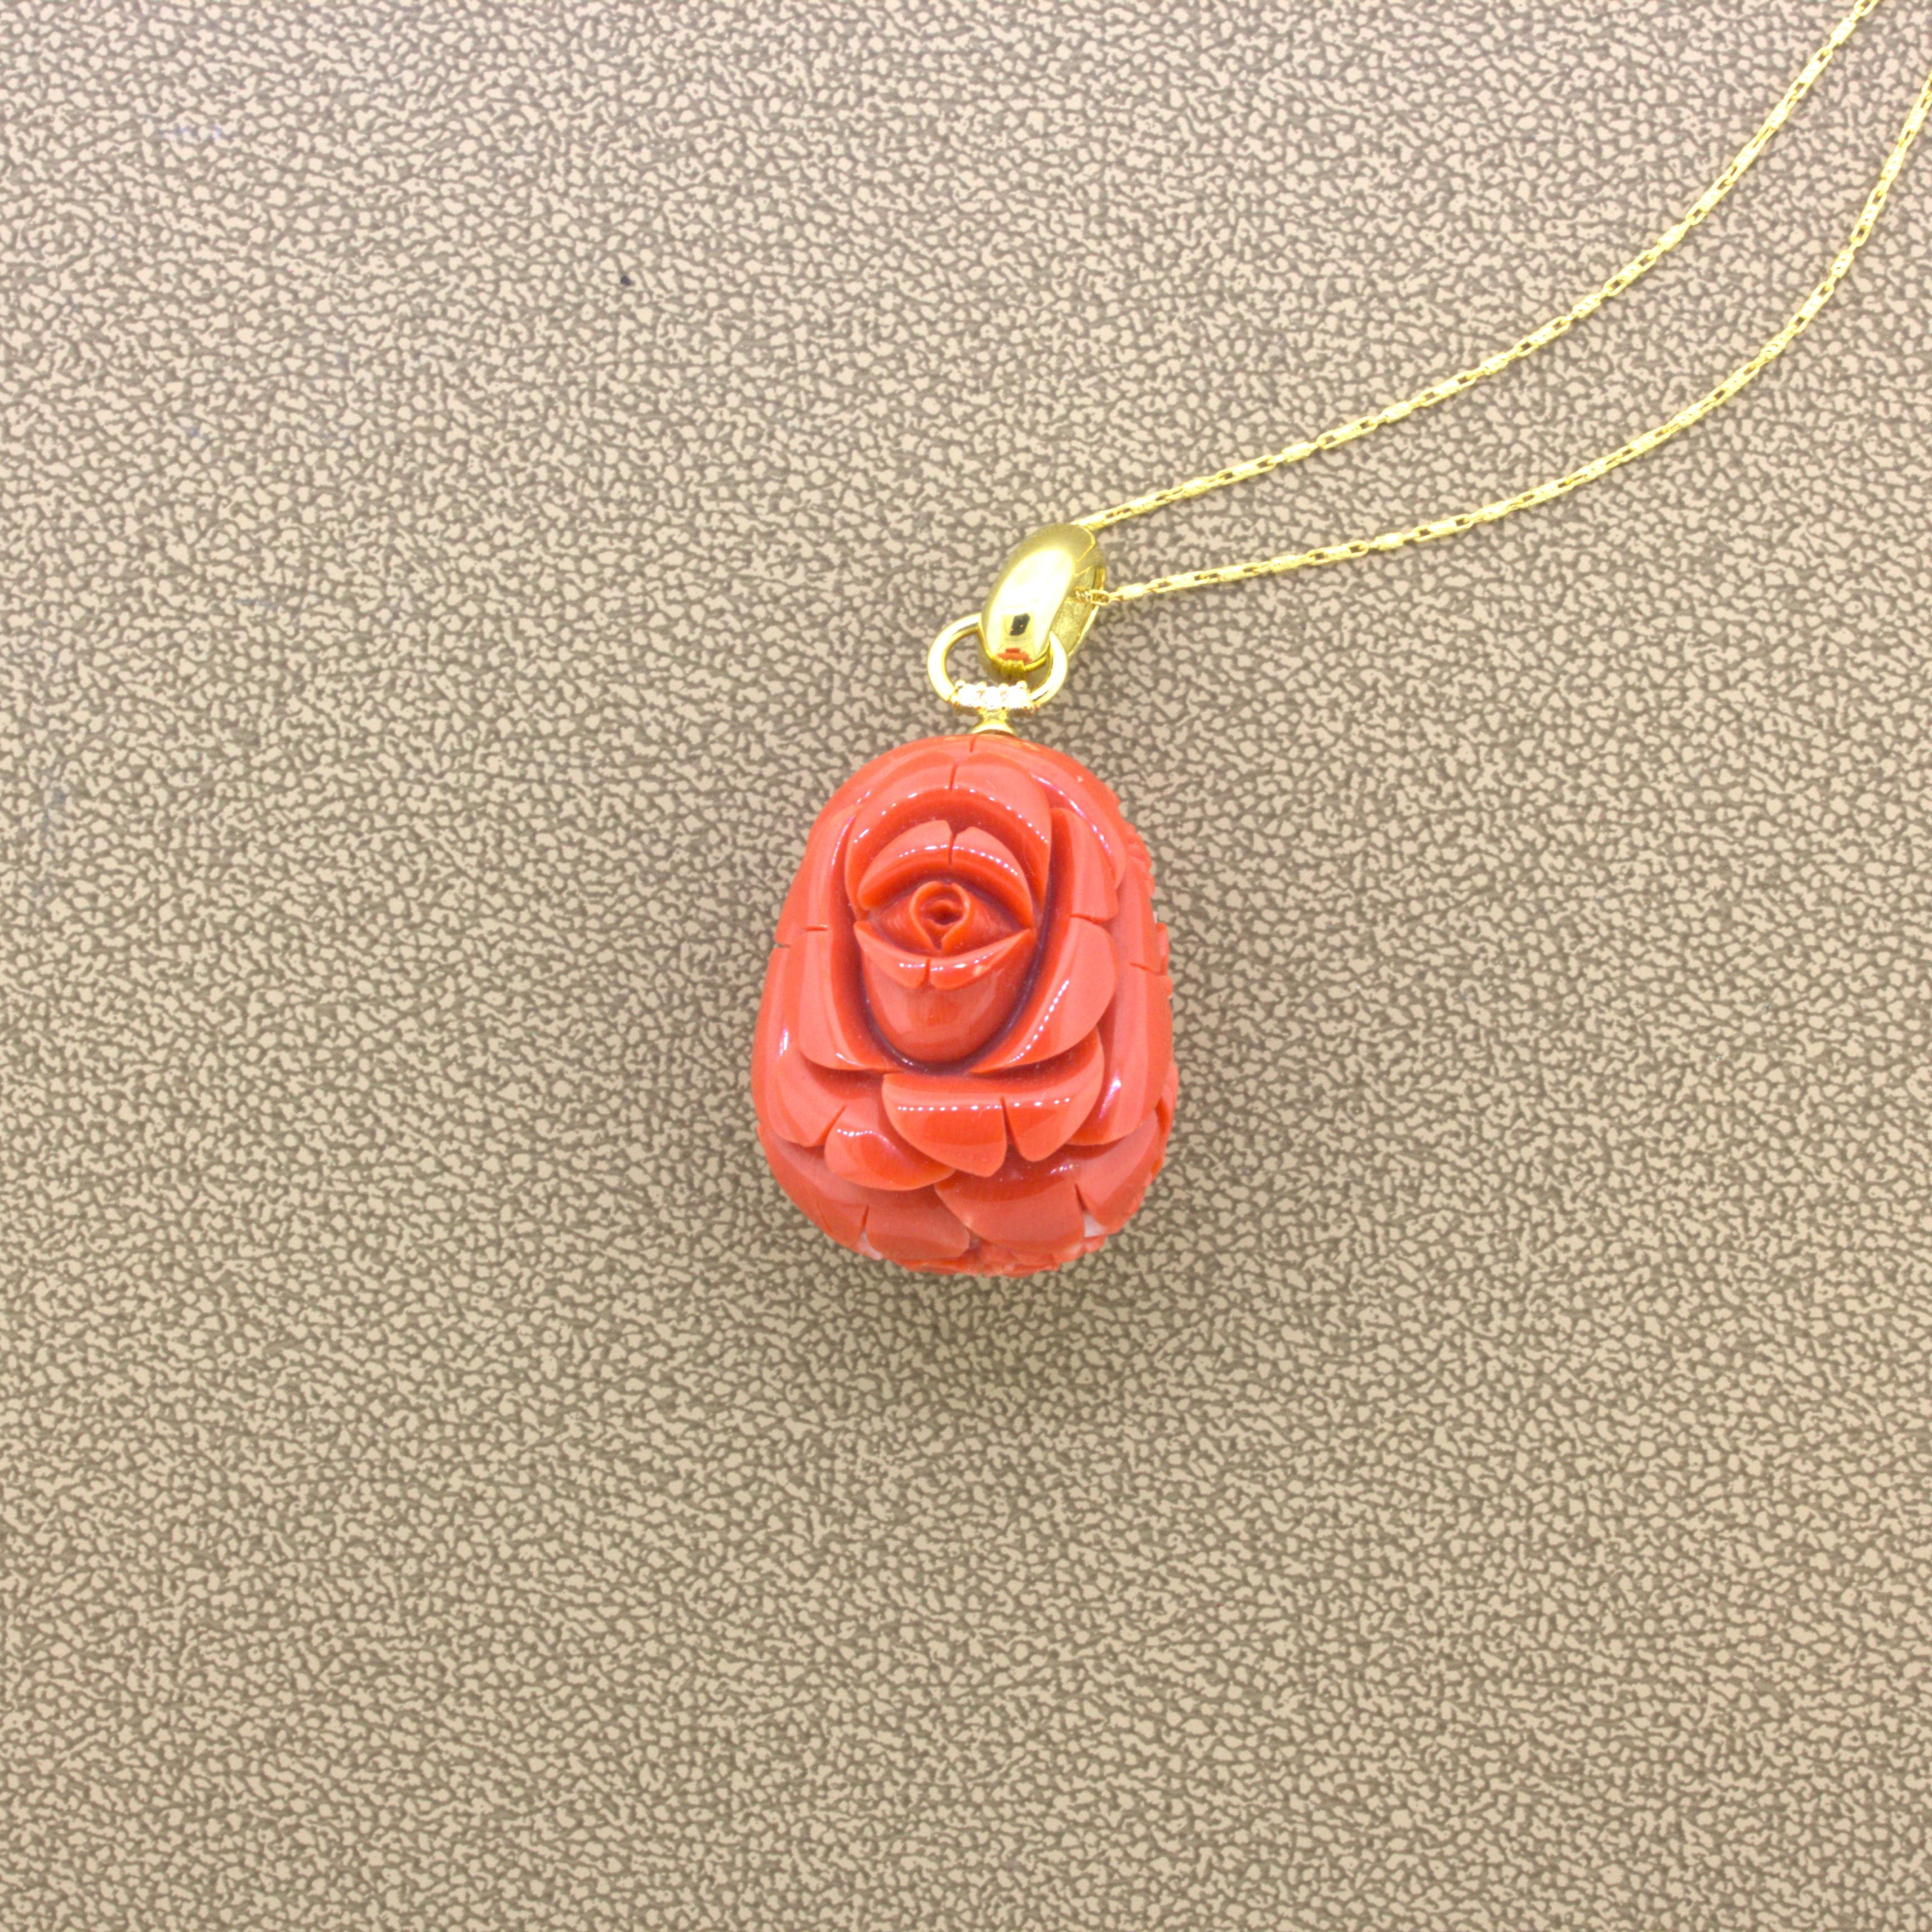 Carved Red Coral Diamond 18K Yellow Gold Floral-Motif Pendant

A chic and sweet pendant featuring a large piece of fine red coral hand-carved depicting an elegant floral motif. The entire surface of the coral is finely detailed. It is complemented